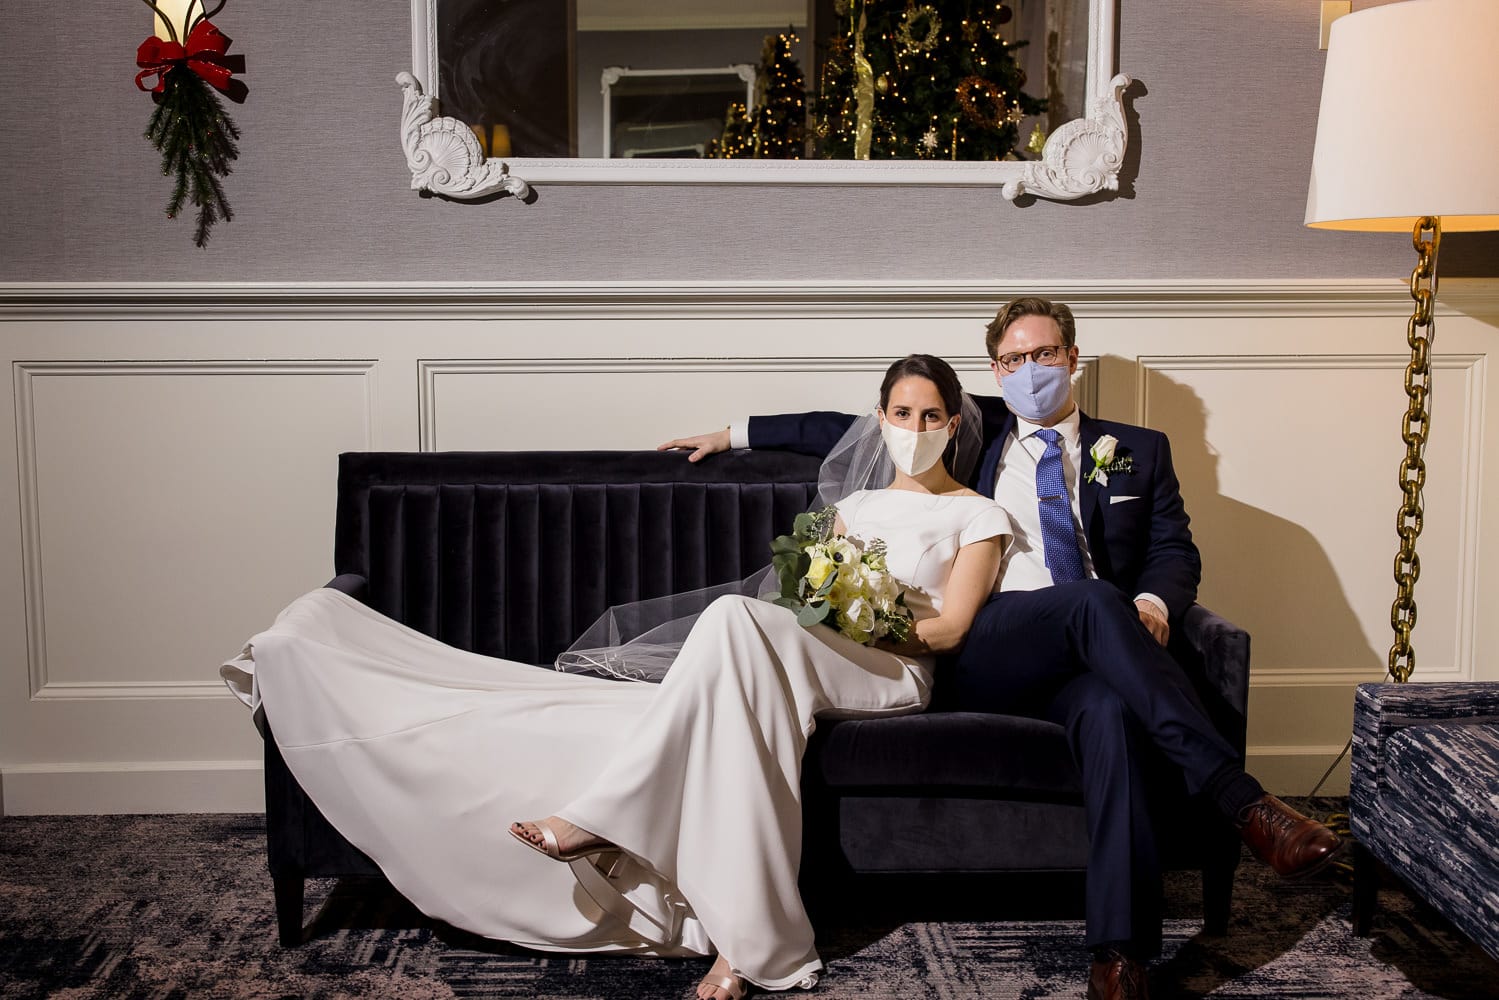 A 2020 bride and groom pose for wedding photos on a velvet couch wearing face masks